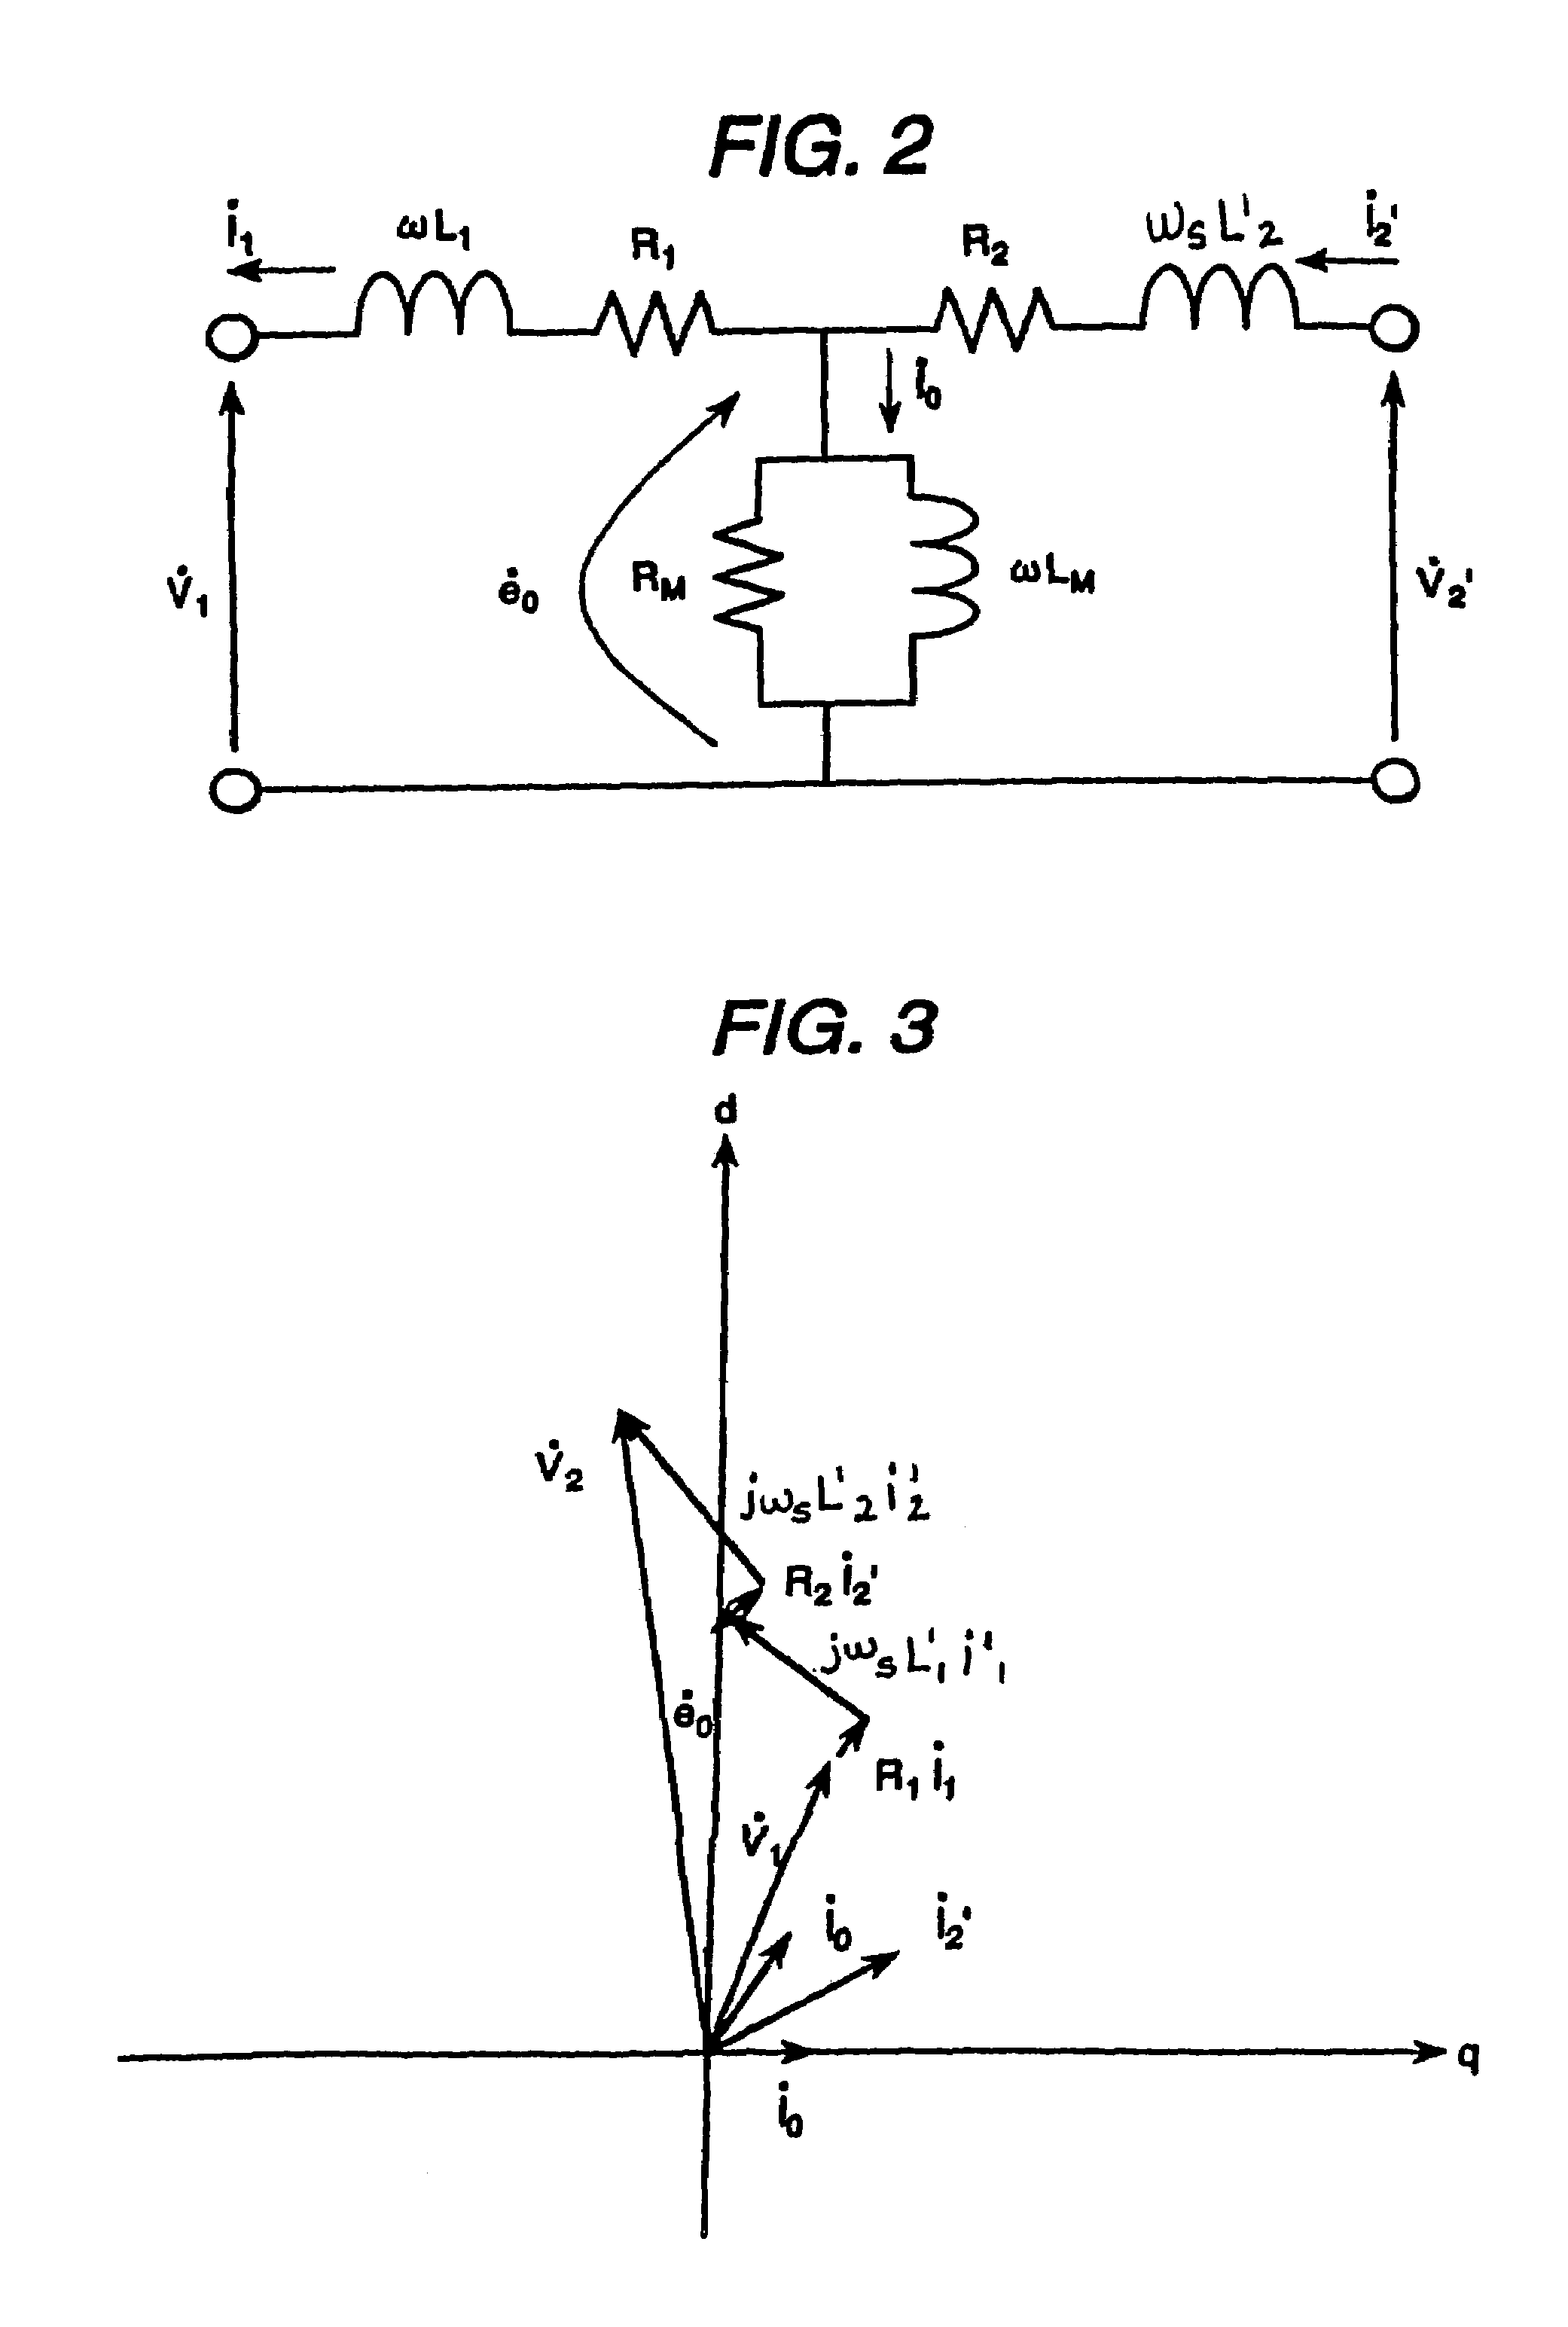 Electrical rotating machine control unit and power generation system